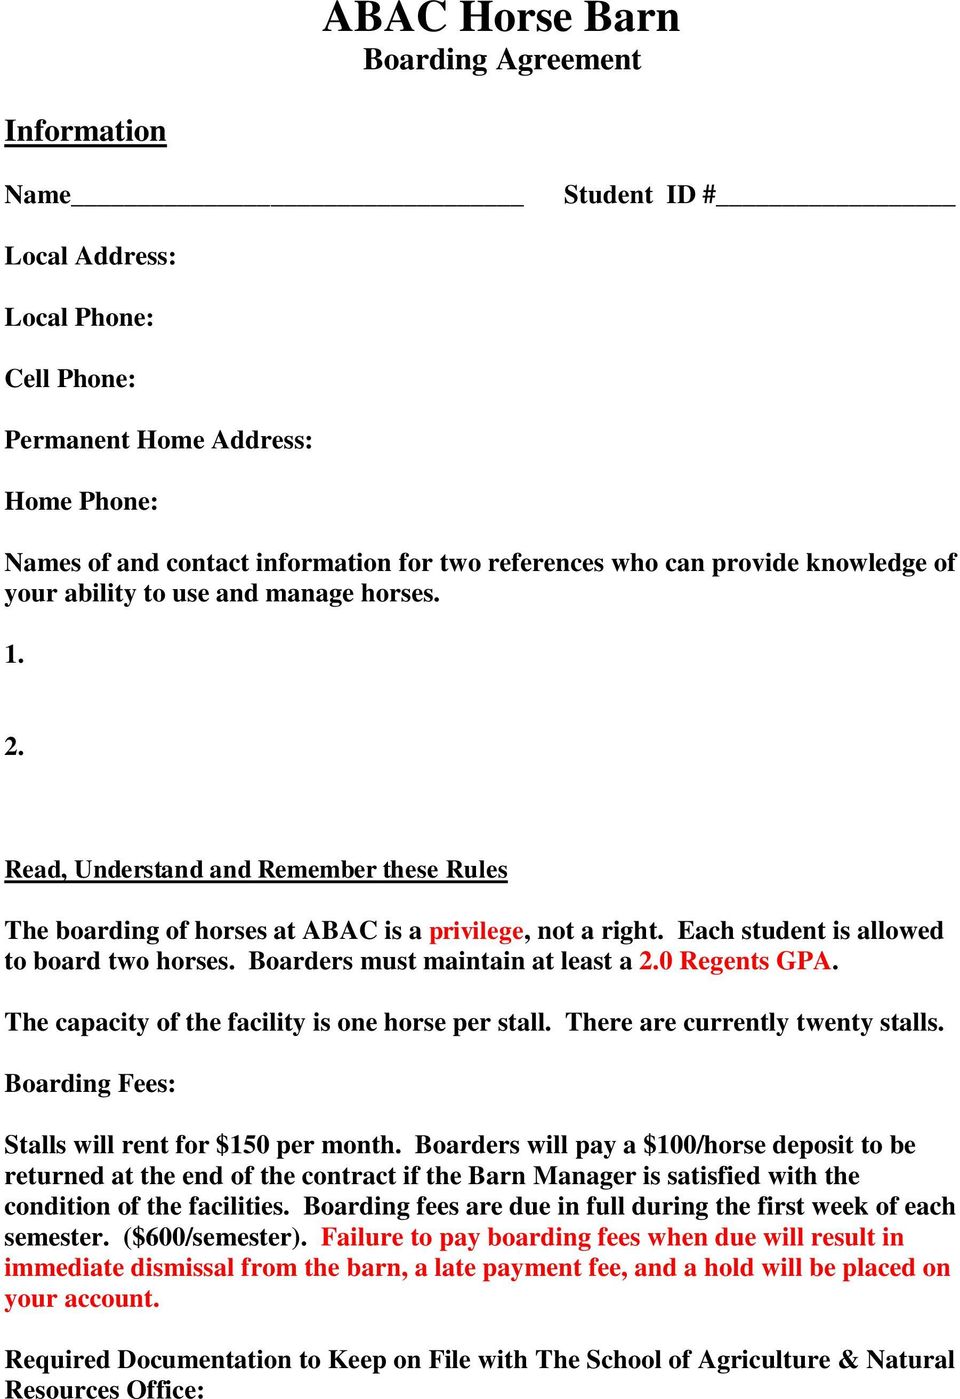 Abac Horse Barn Boarding Agreement Pdf Free Download,Korean Toasted Sesame Seeds